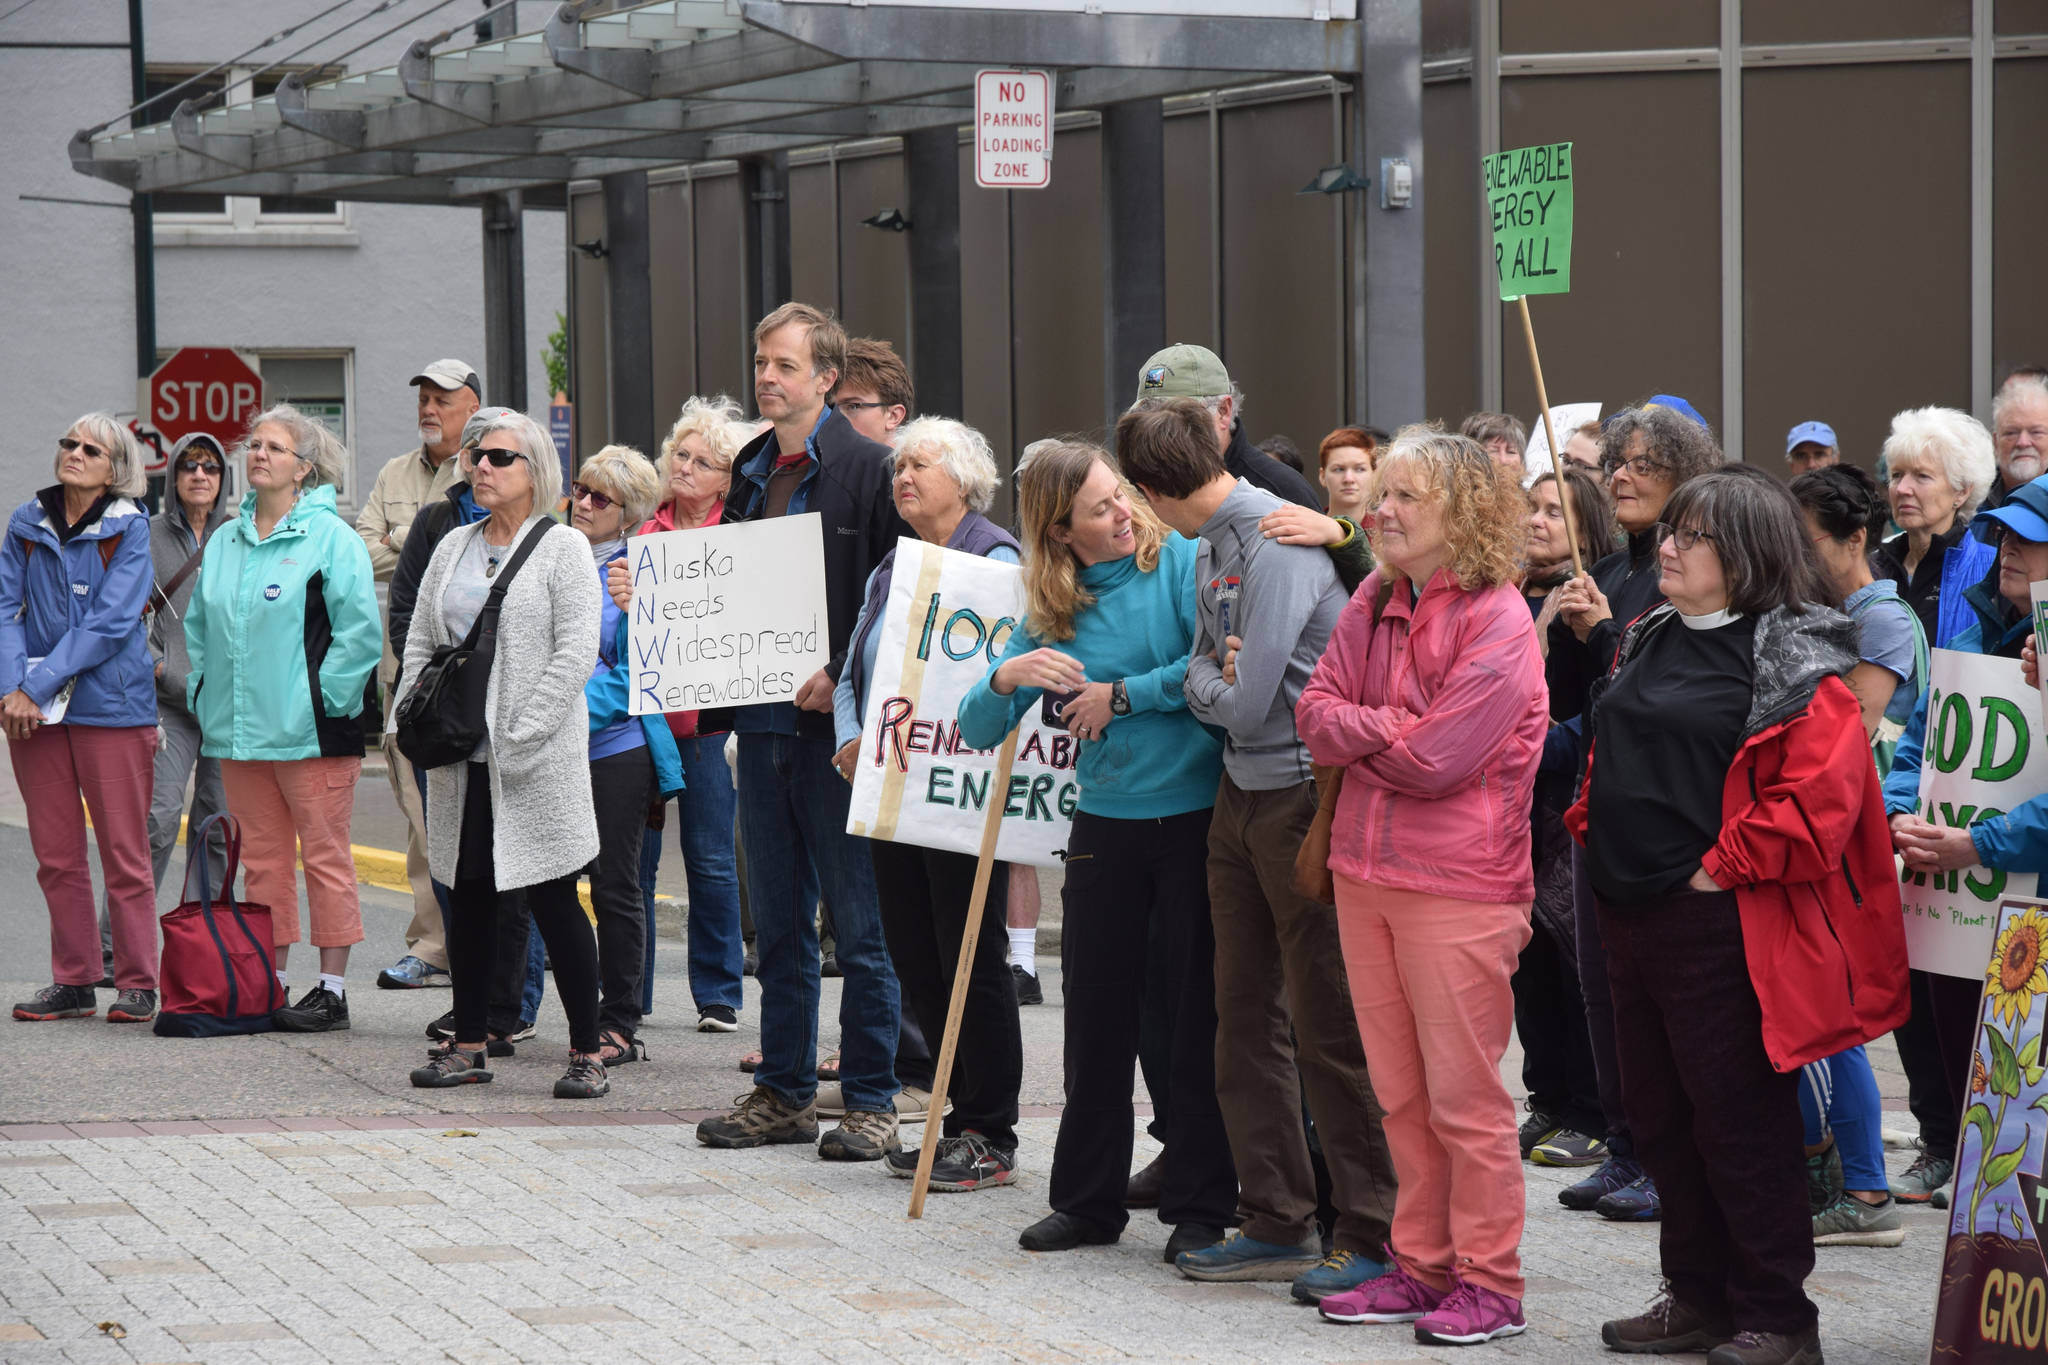 About 200 protesters attended a rally for climate change action at the Alaska Capitol on Saturday, Sept. 8, 2018. (Kevin Gullufsen | Juneau Empire)